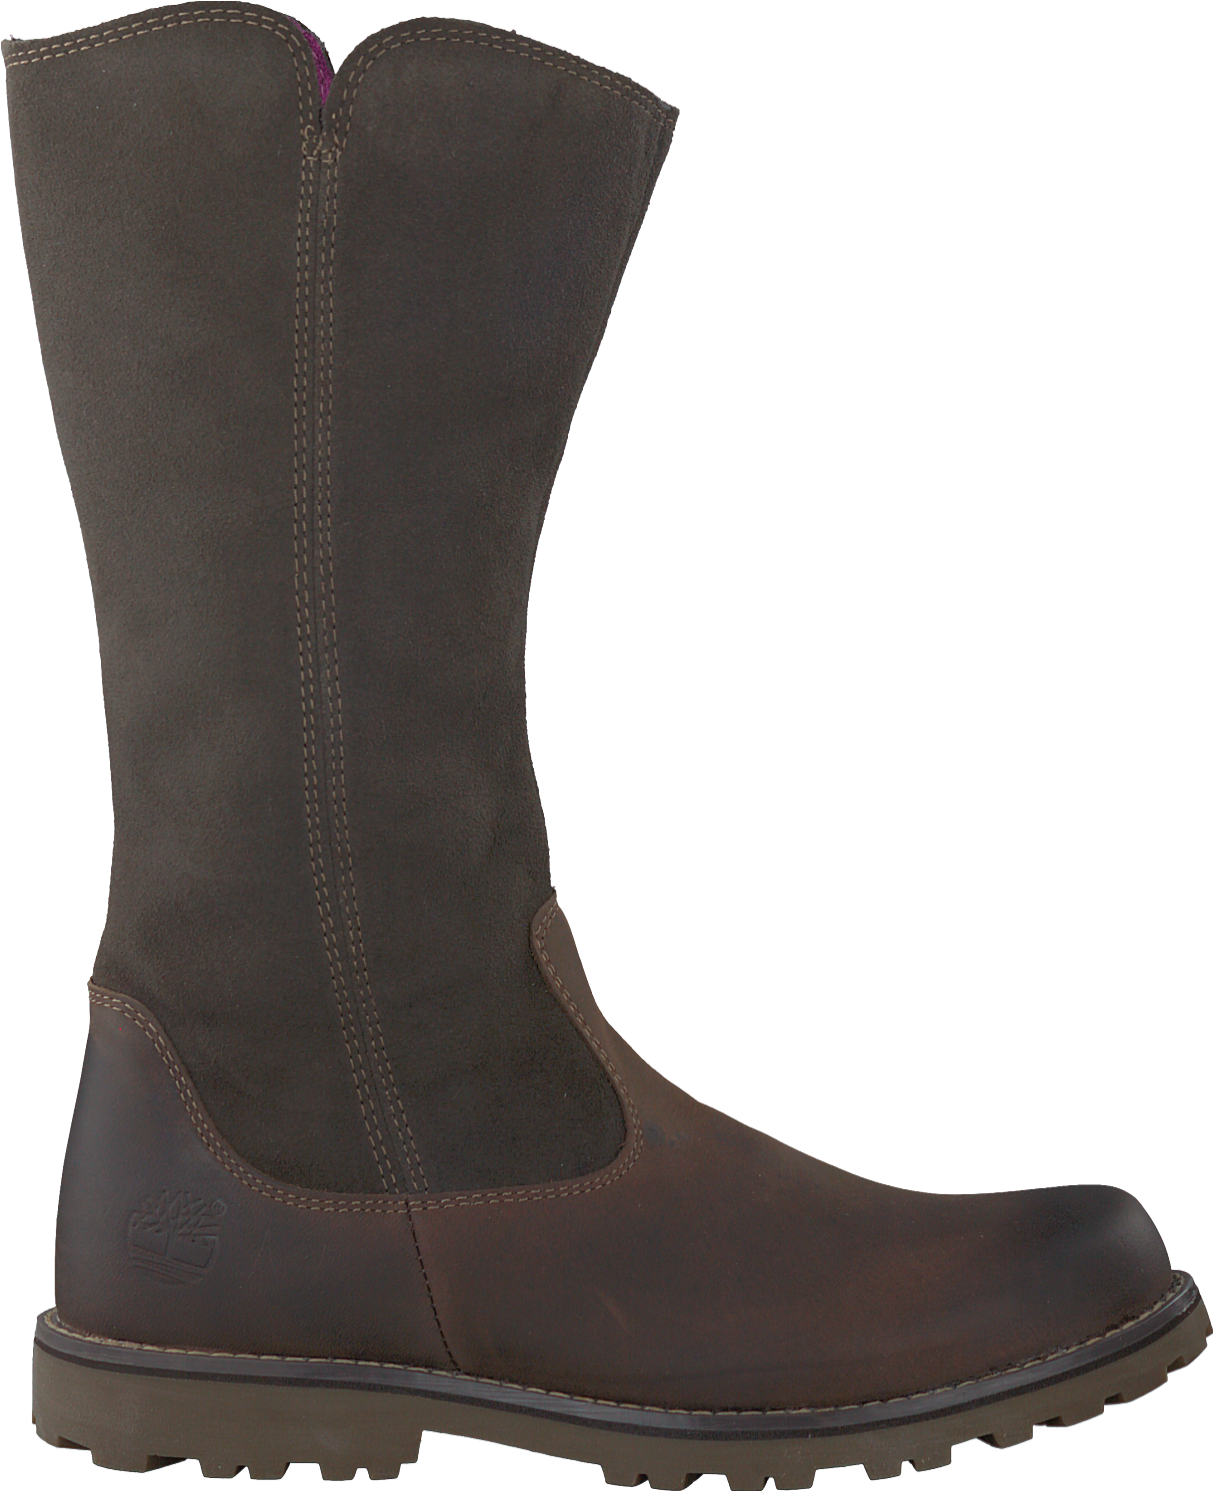 Dark Brown Leather Knee High Boot PNG